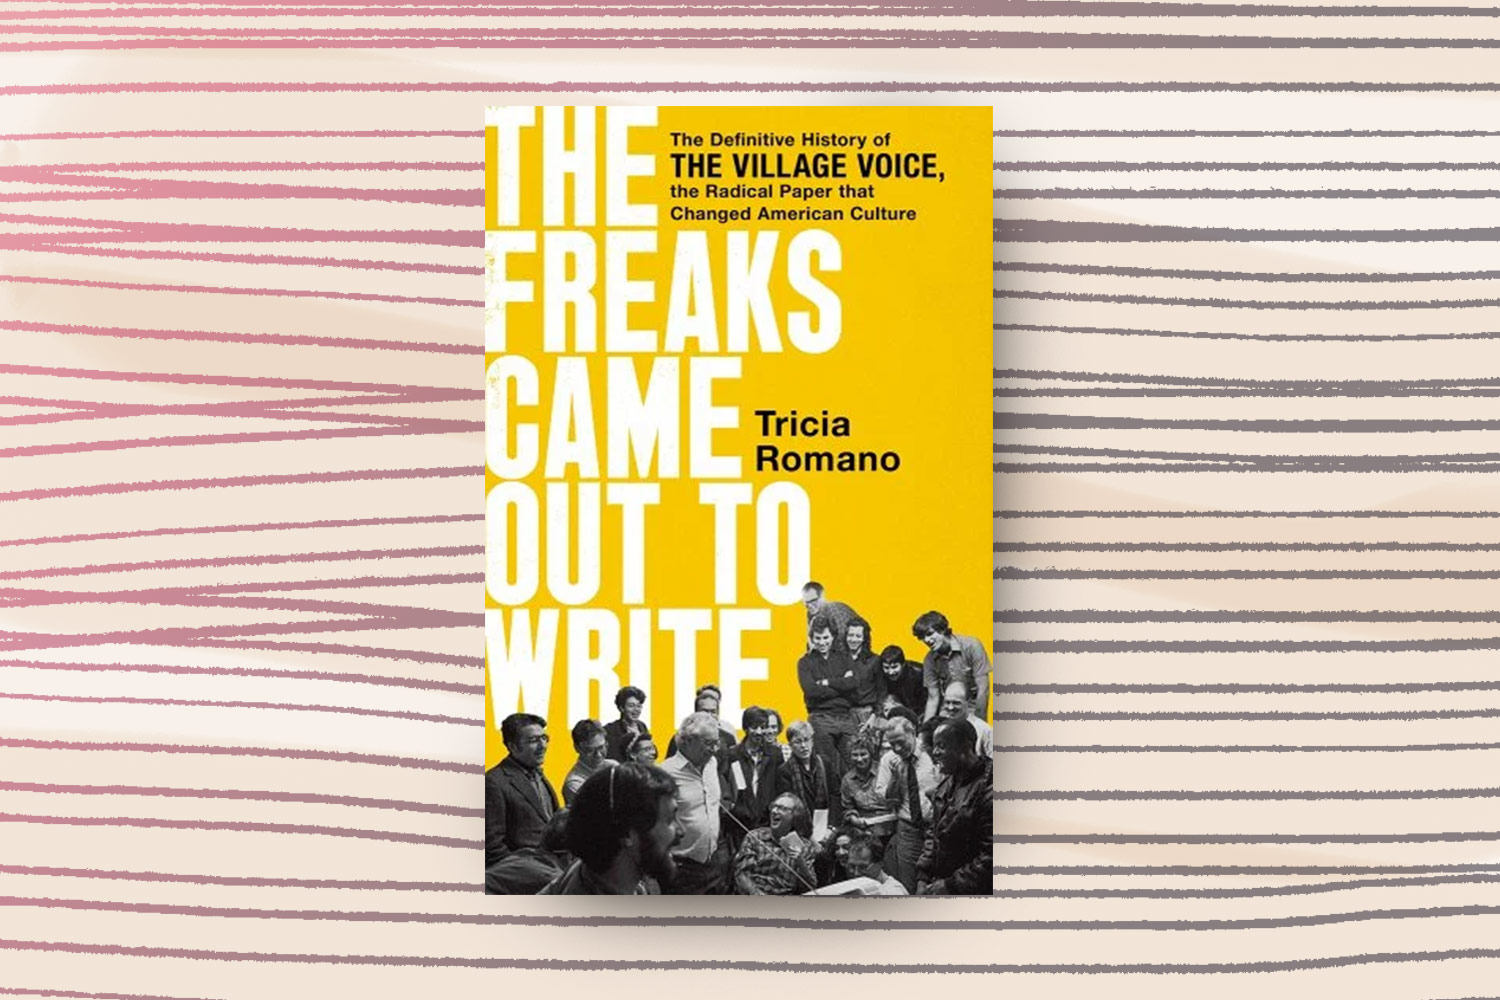 Tricia Romano, The Freaks Came Out to Write: The Definitive History of the Village Voice, the Radical Paper That Changed American Culture